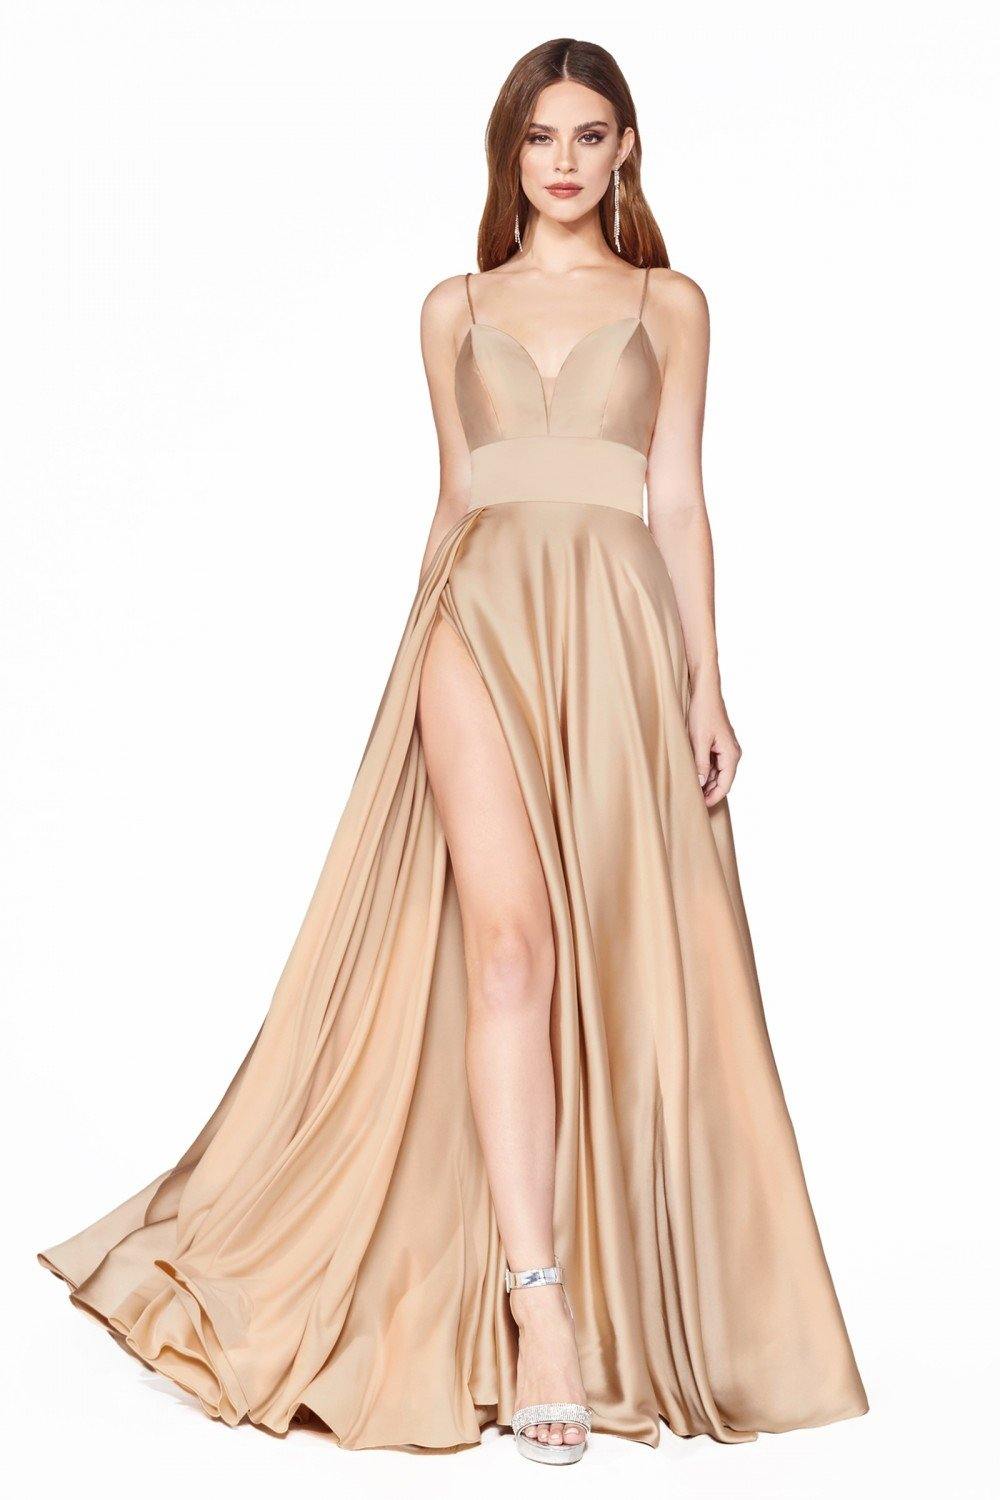 Sexy Long Prom Dress Evening Gown - The Dress Outlet